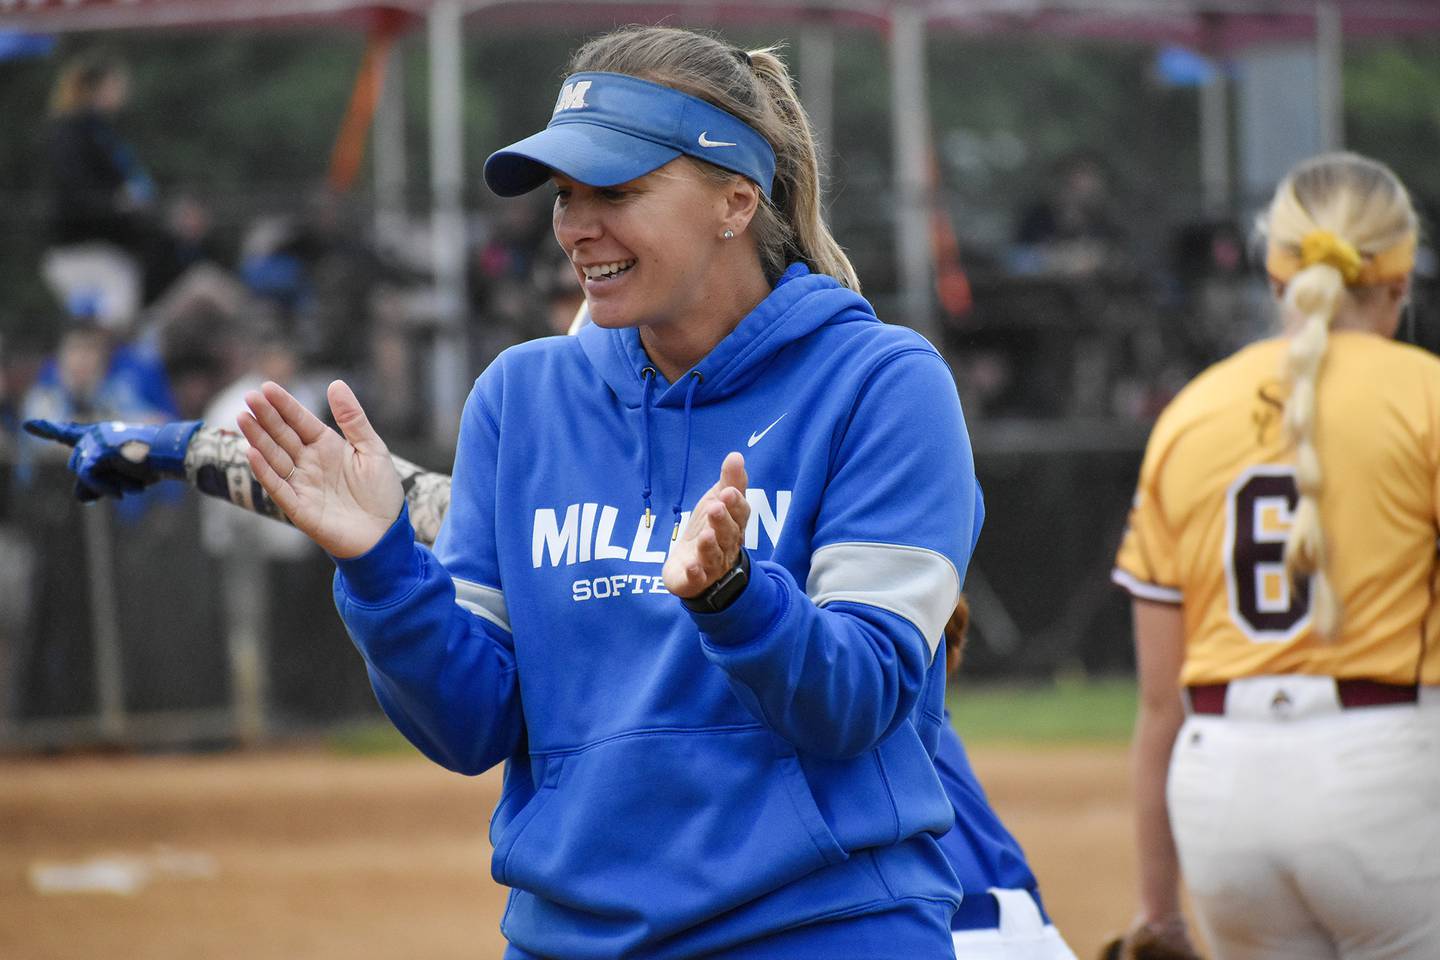 Millikin softball coach Katie Tenboer claps during a game at the NCAA Division III World Series. Tenboer, a Morrison native, led the Big Blue to the D-III championships for the first time in program history.